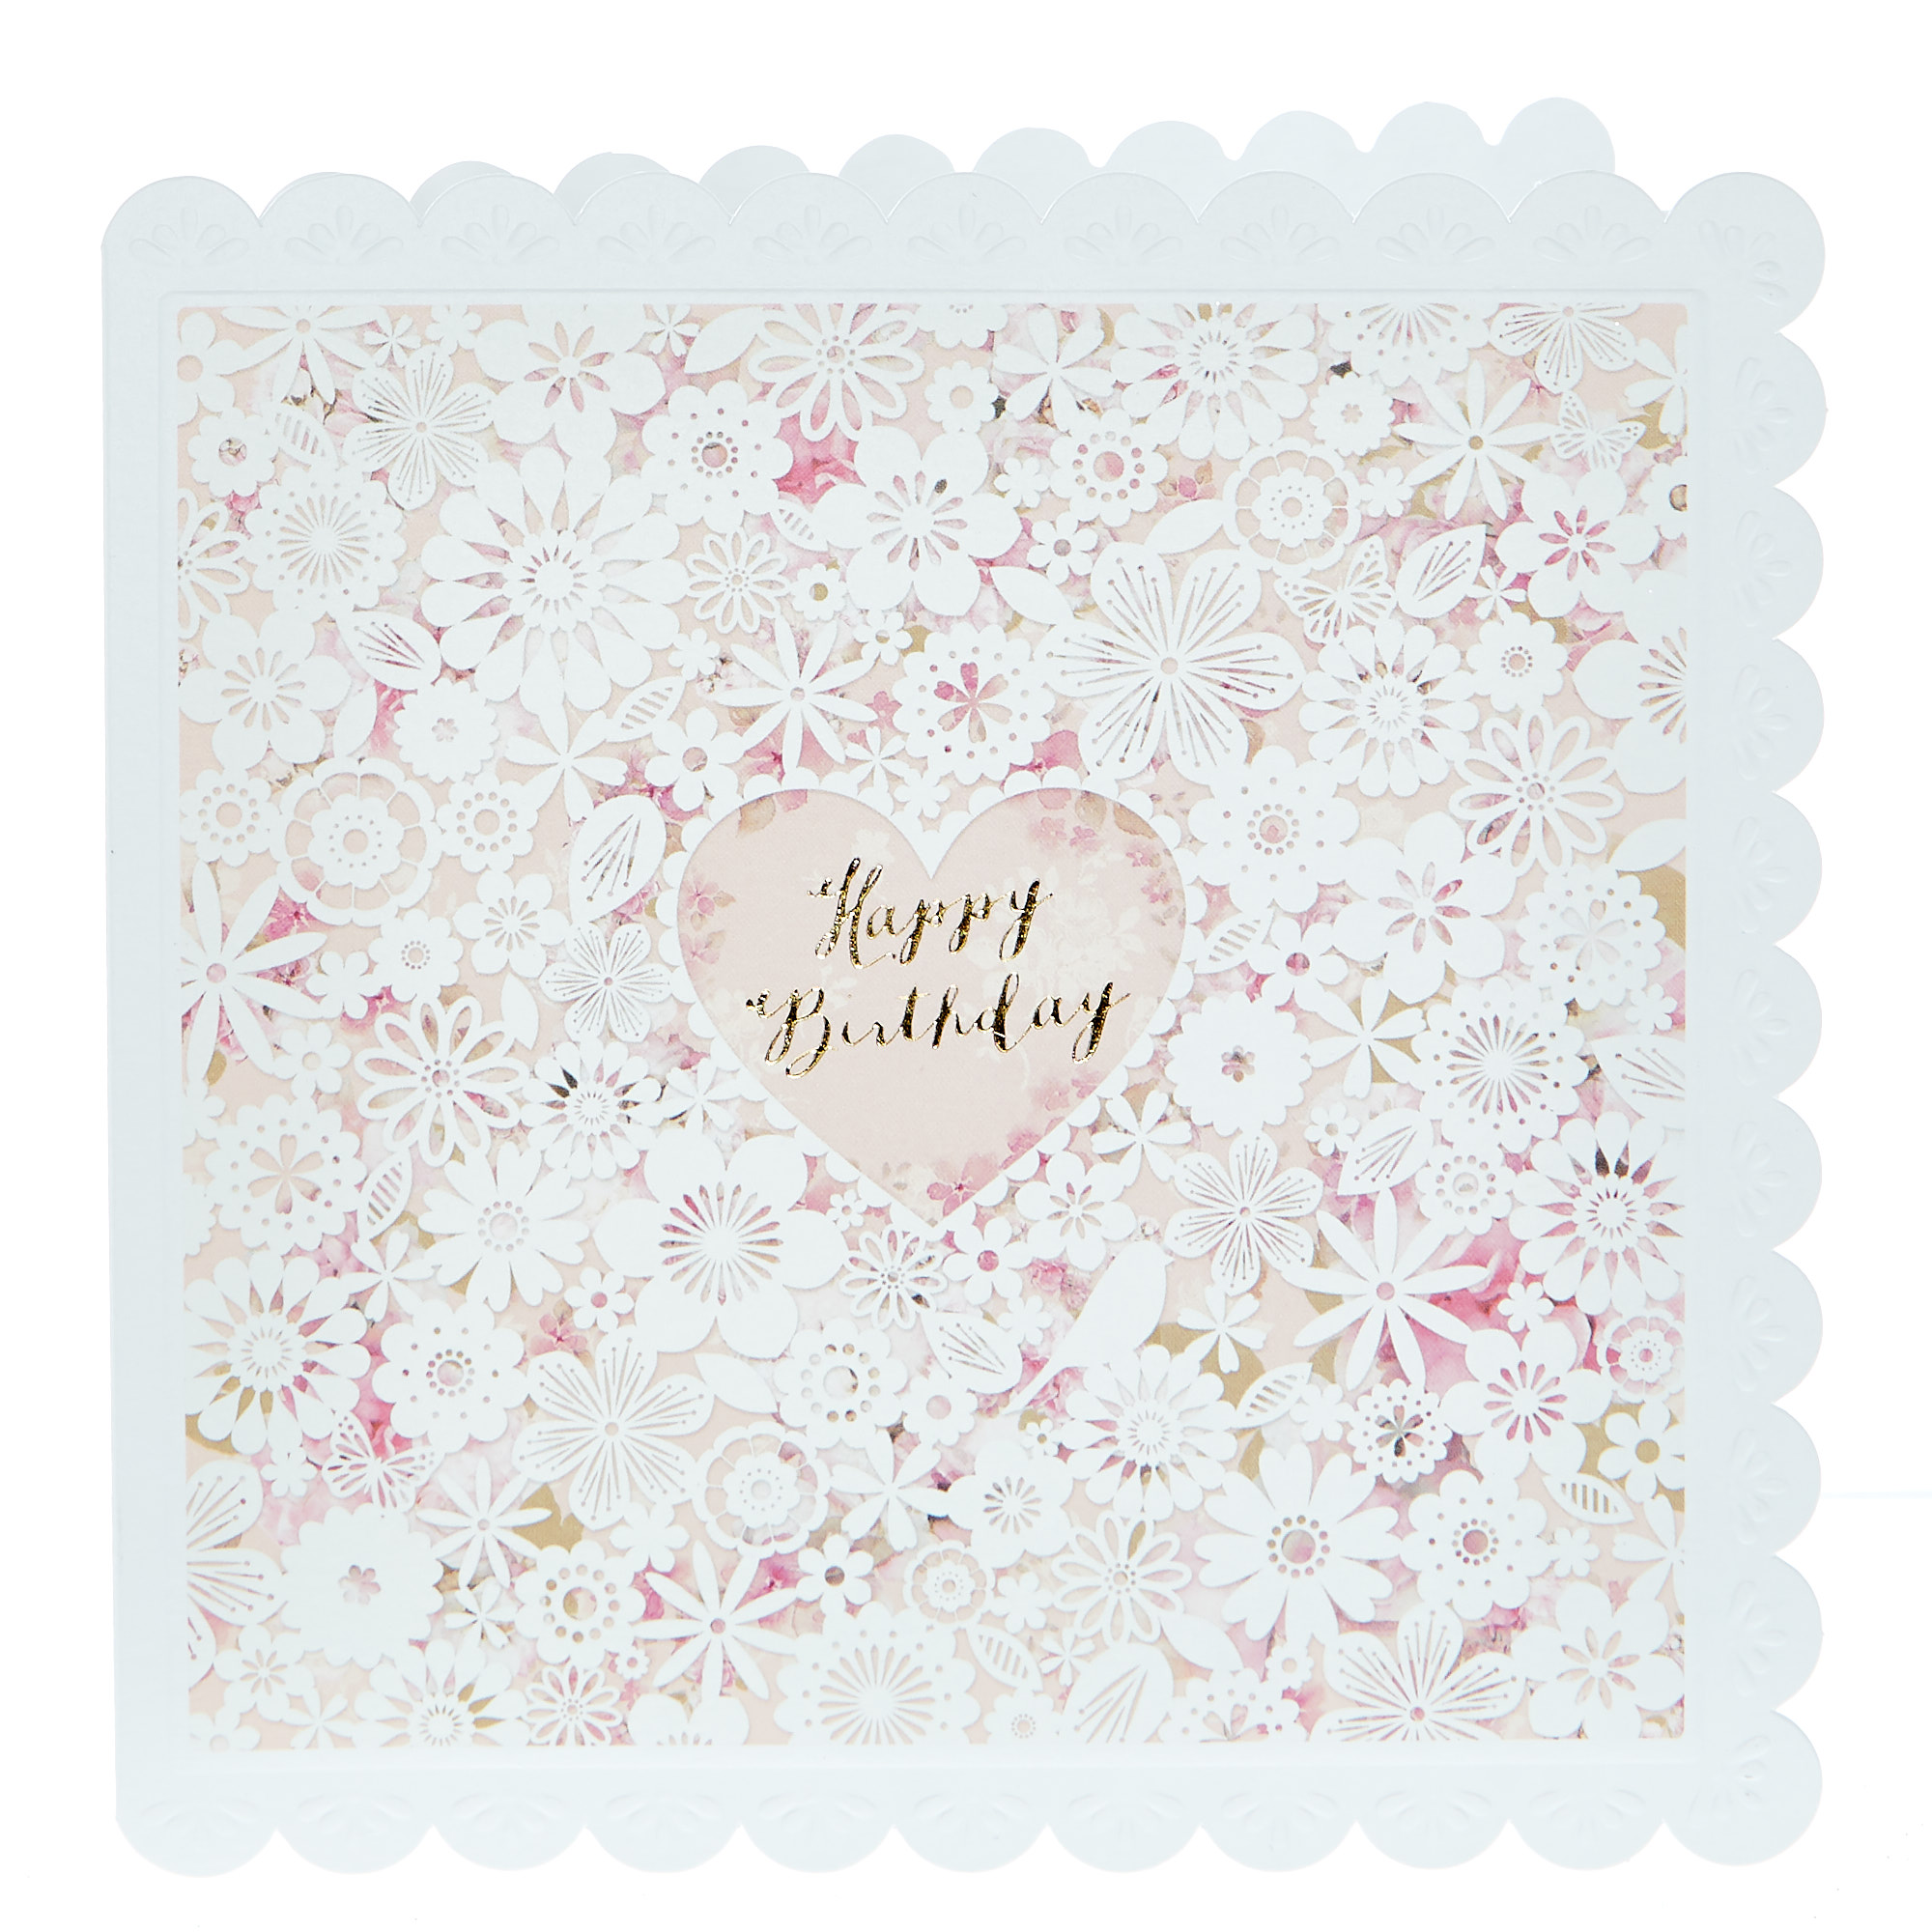 Birthday Card - Pink & White Floral